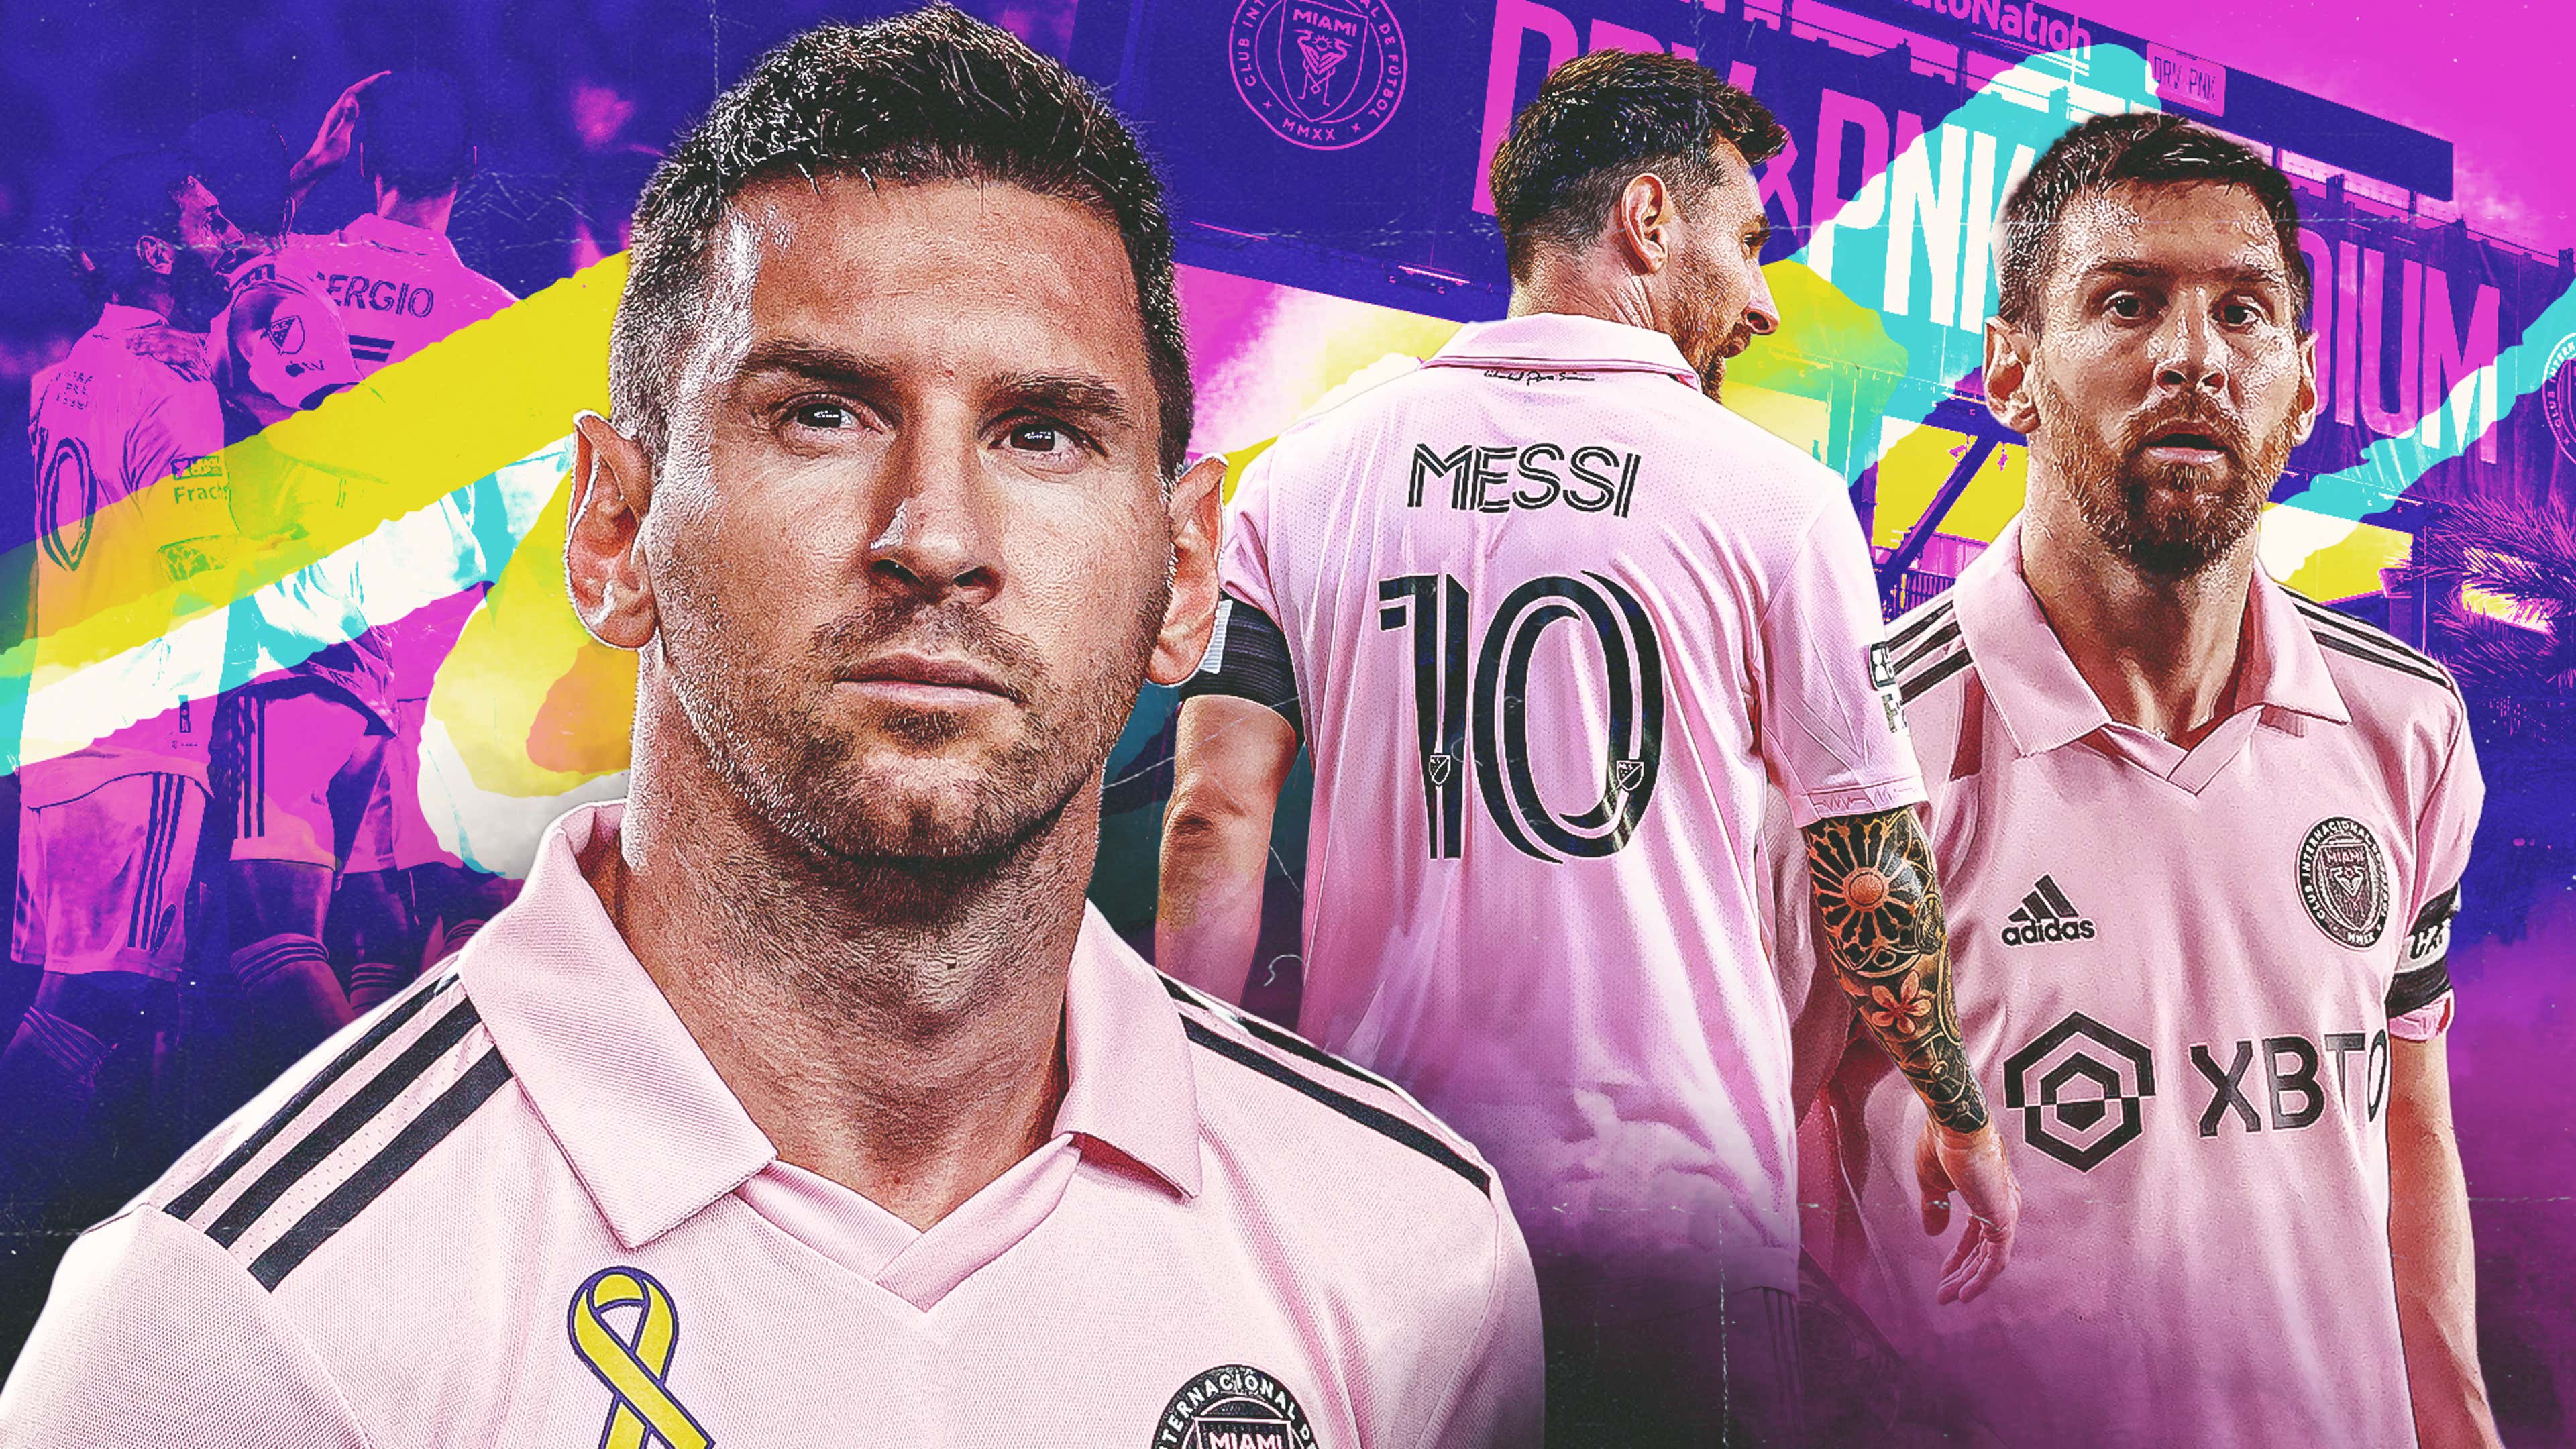 Lionel Messi returns, but Inter Miami's playoff dream ends: Now what?